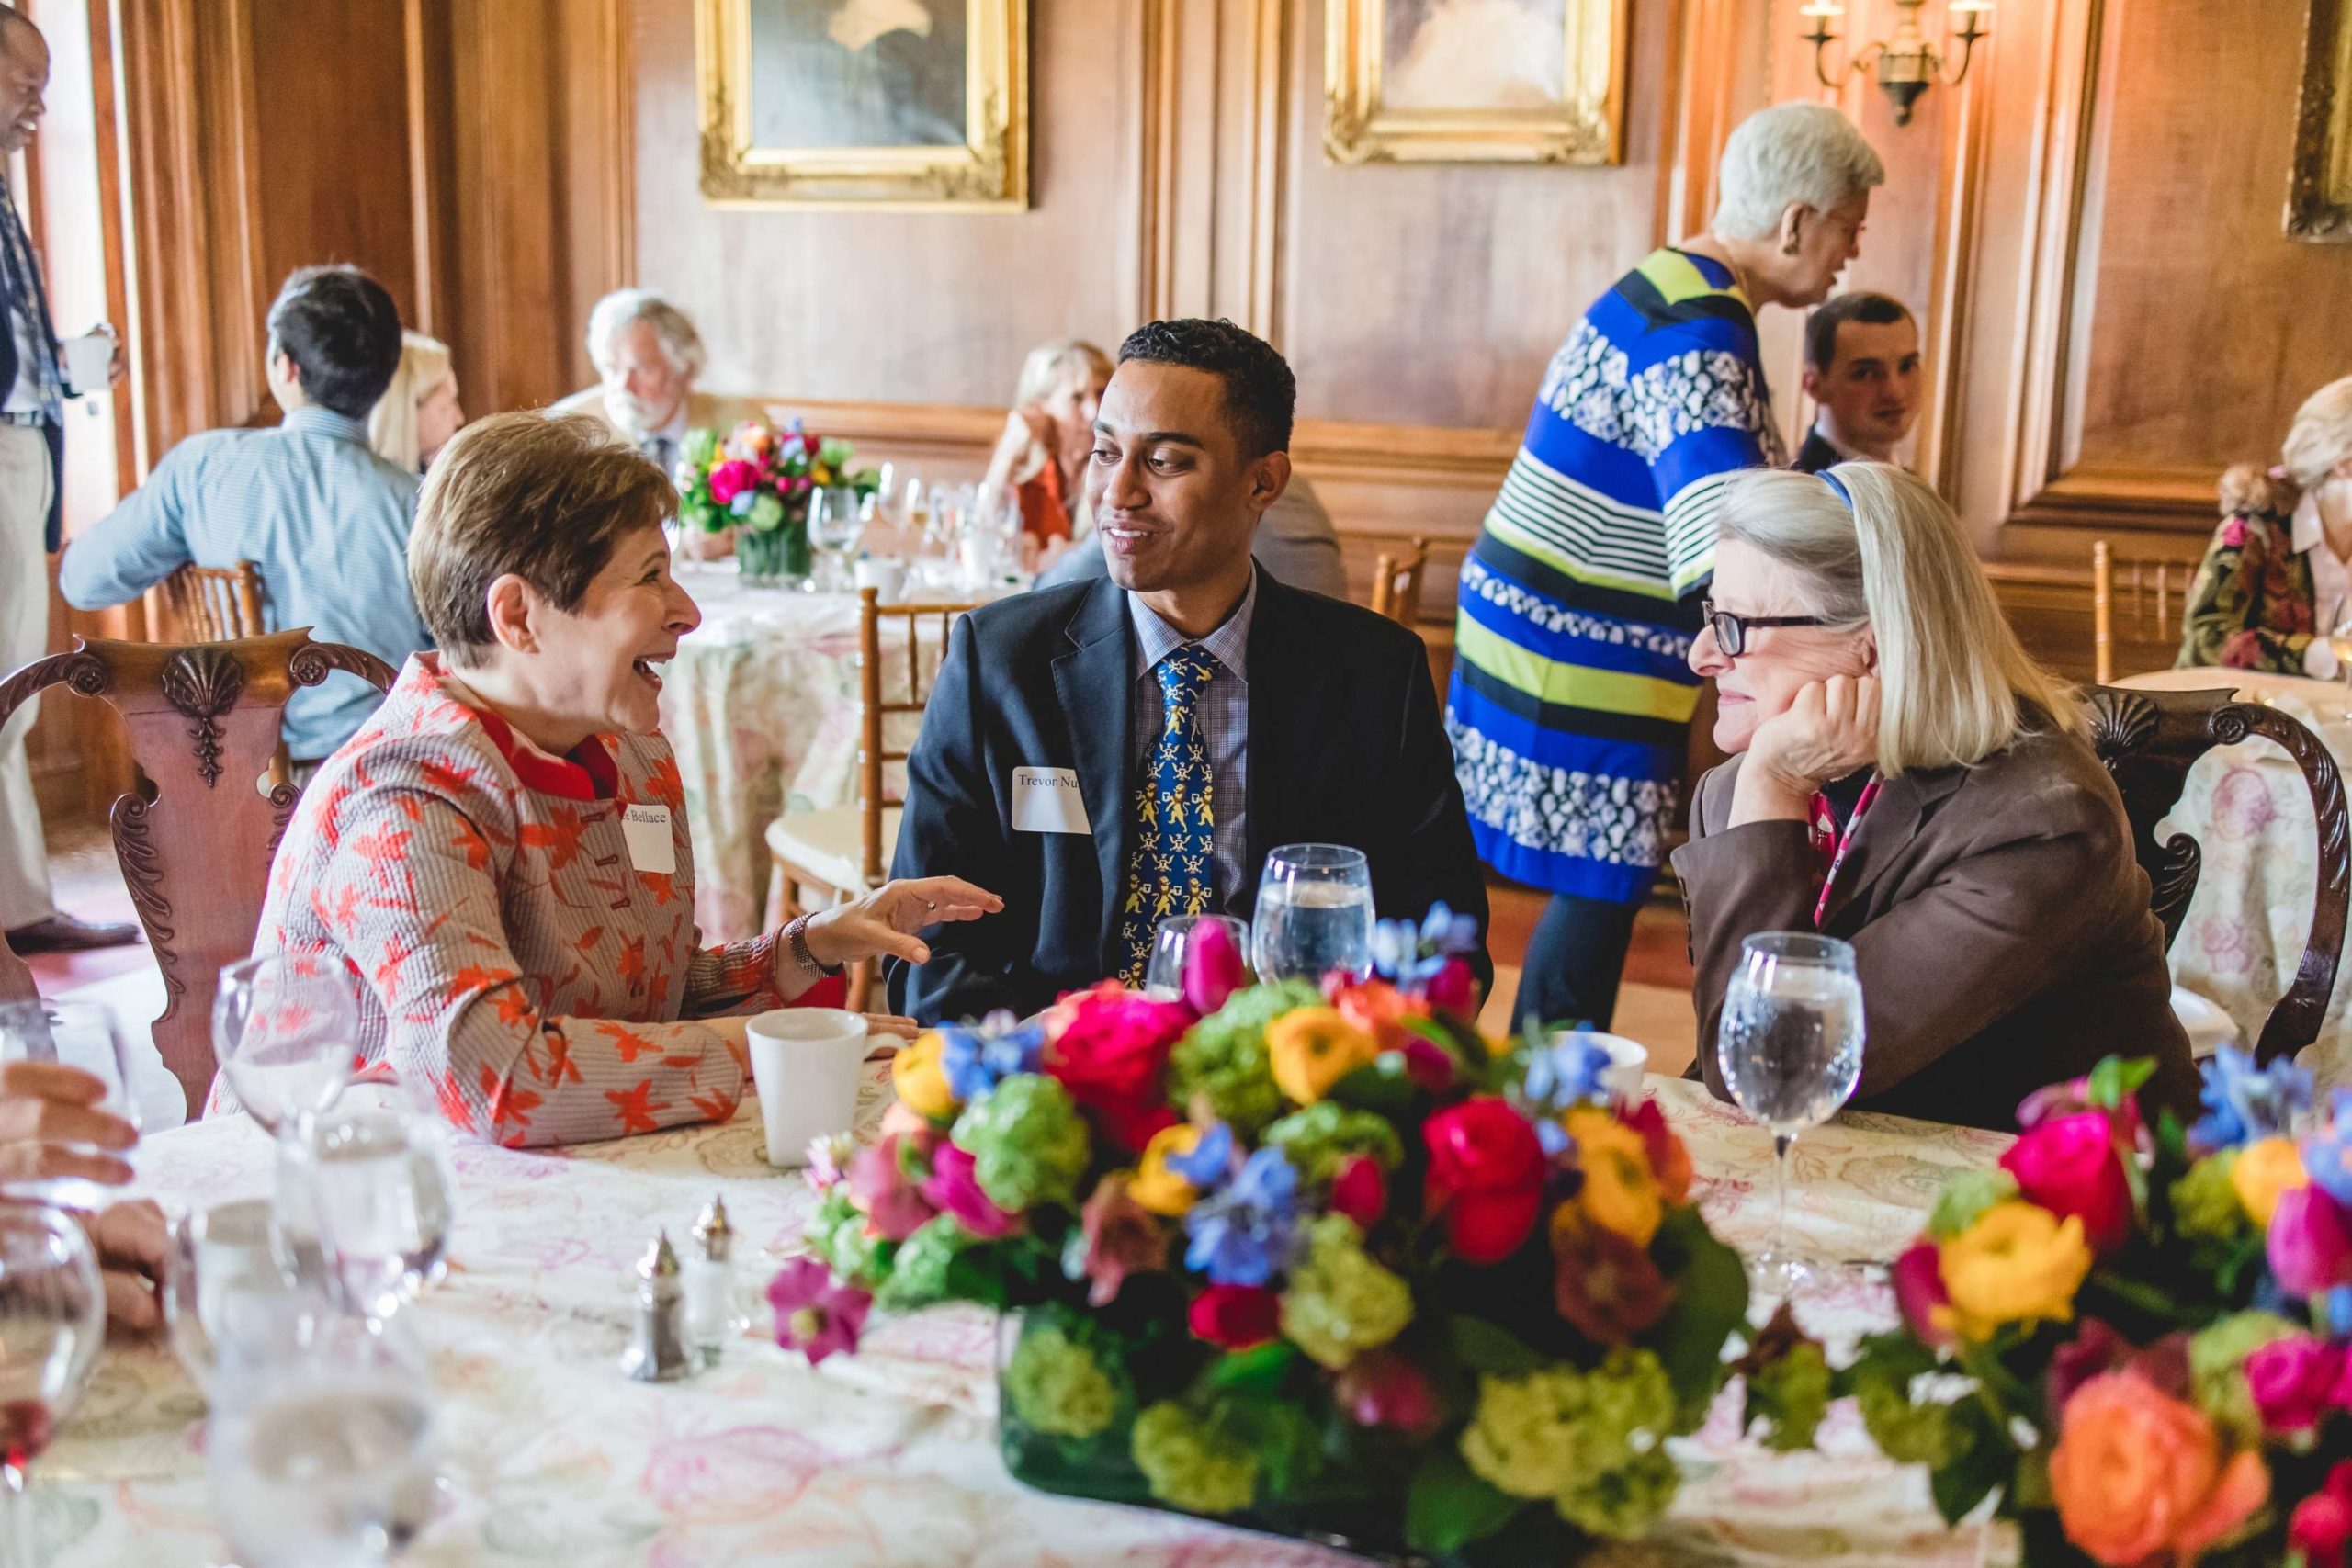 New Scholar chats with Alumni at the welcome luncheon in April 2022